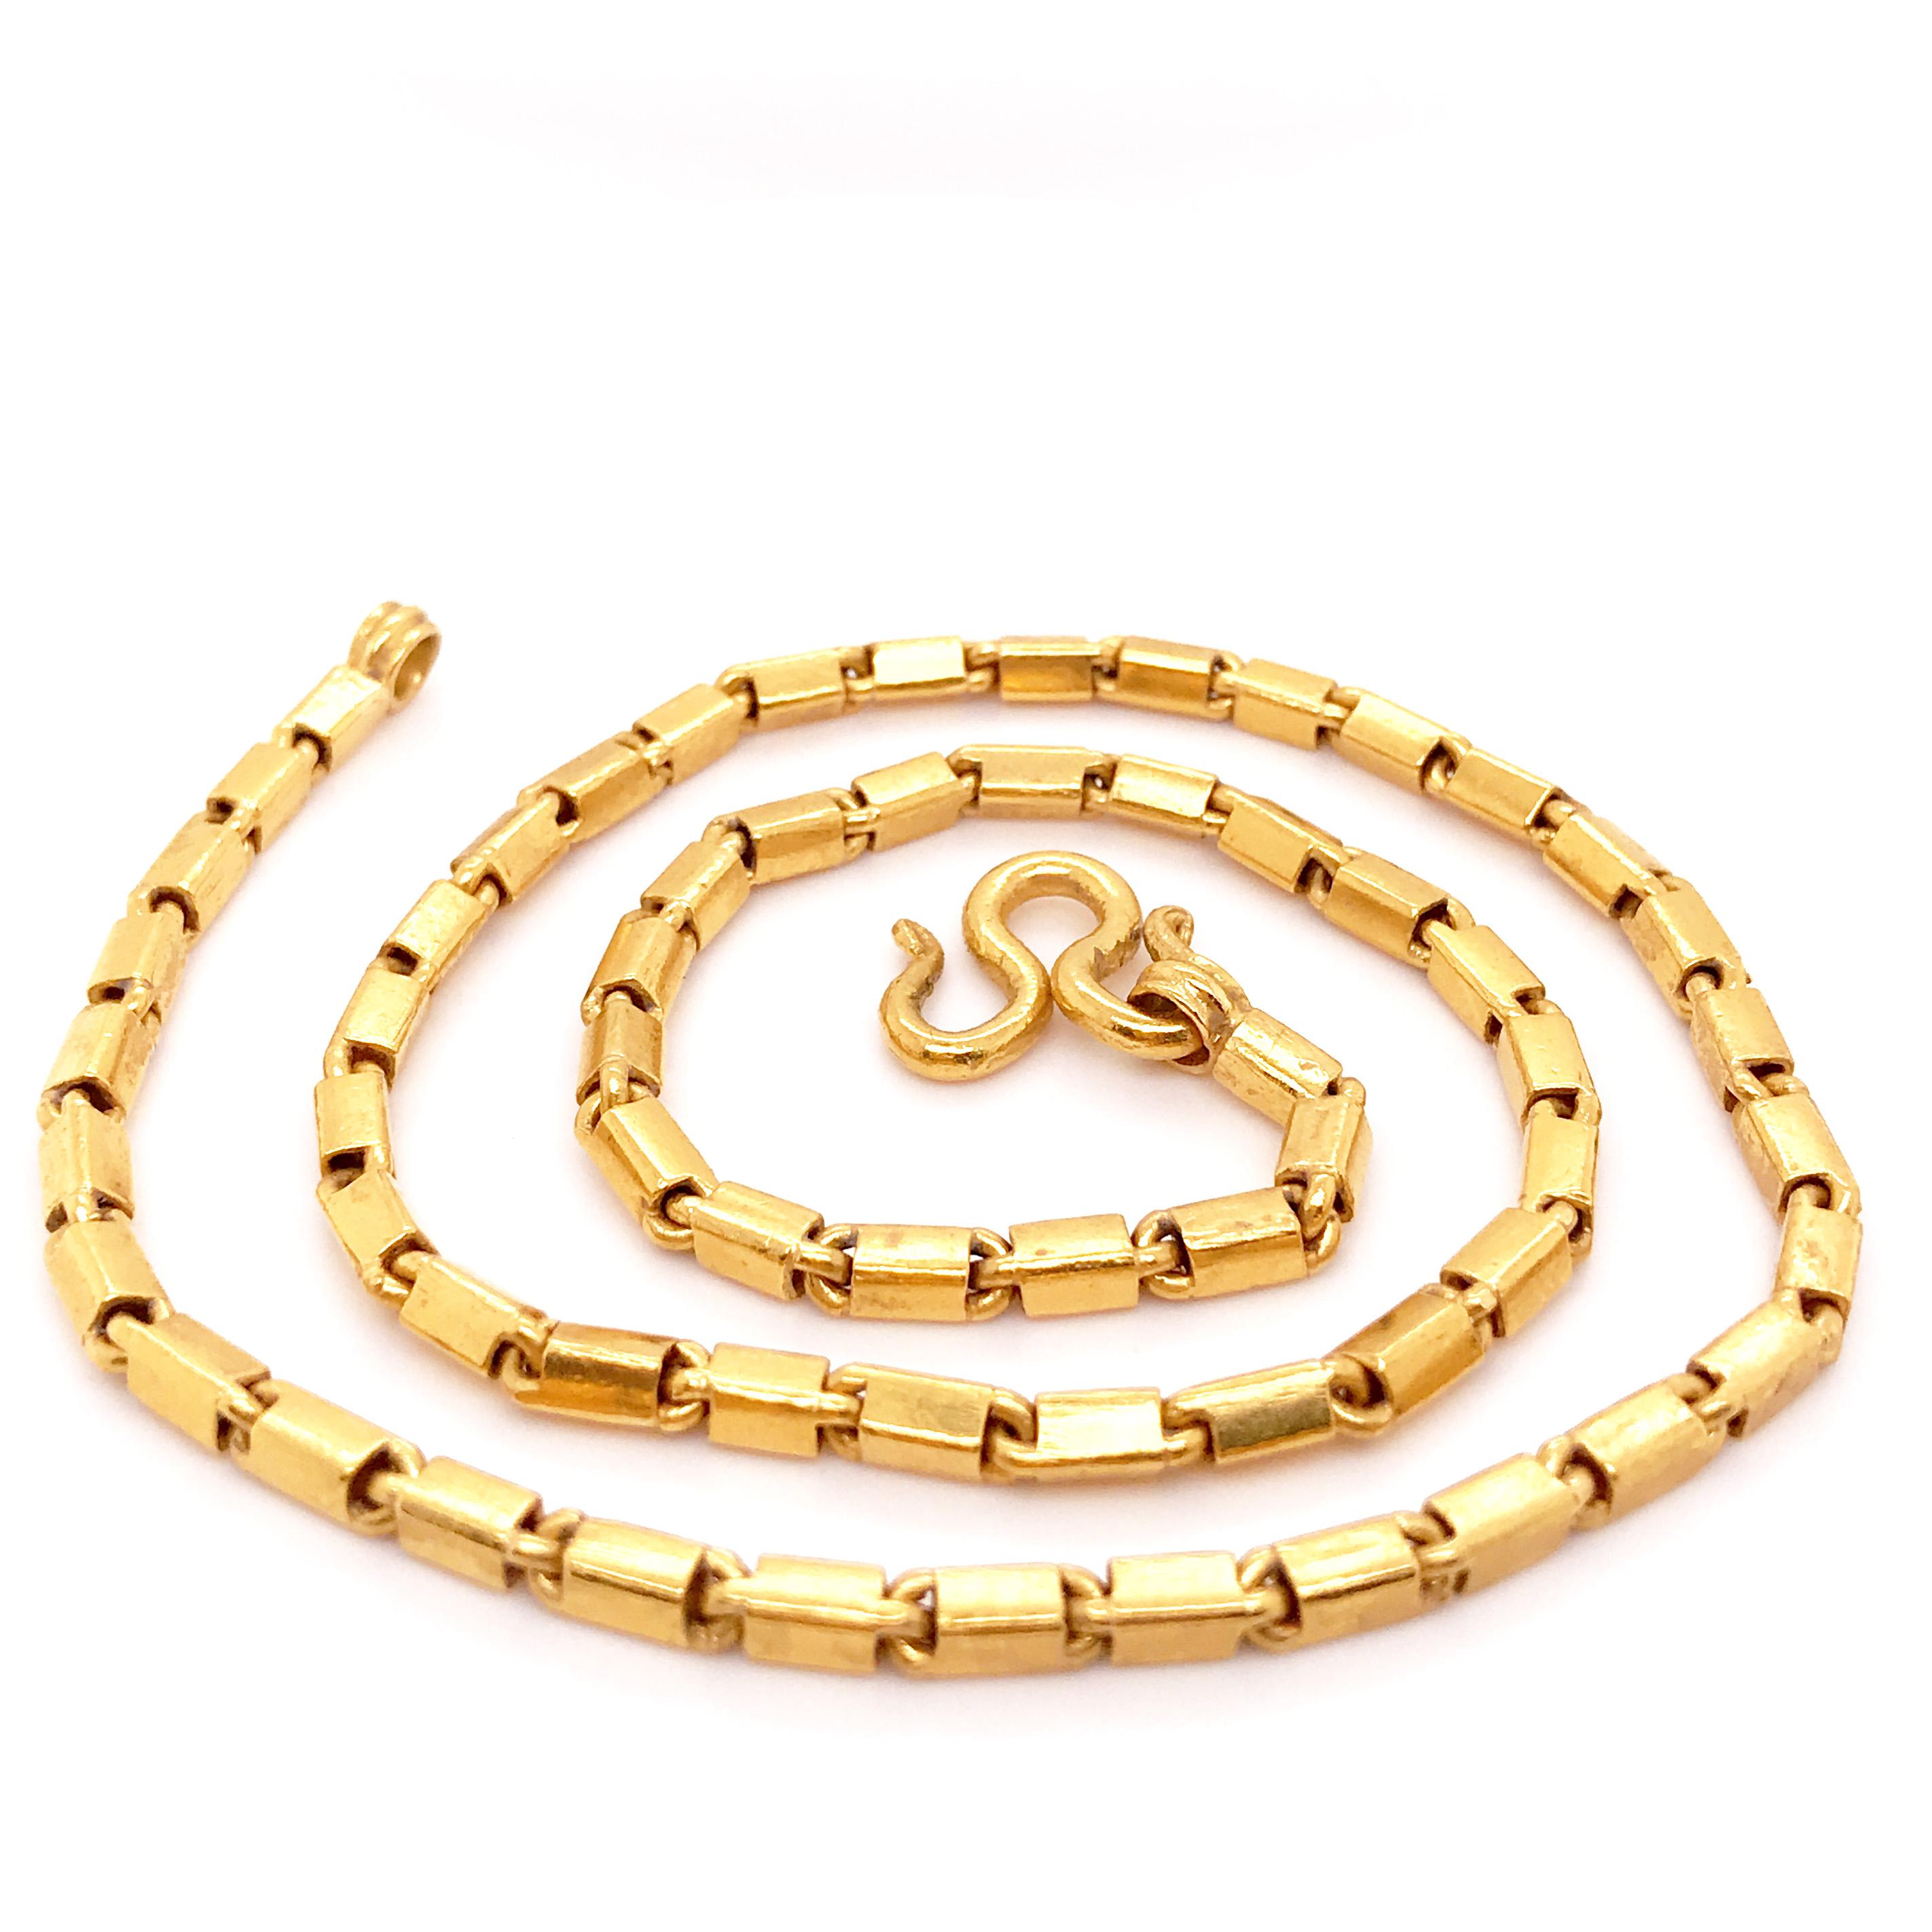 This 22kt Baht Chain is the heavies that I have ever seen!  With over 46 grams of 22kt gold this is a very good investment to have gold at your fingertips.  At 19 inches it would fit almost any man and most women.  When you hold it you can feel the